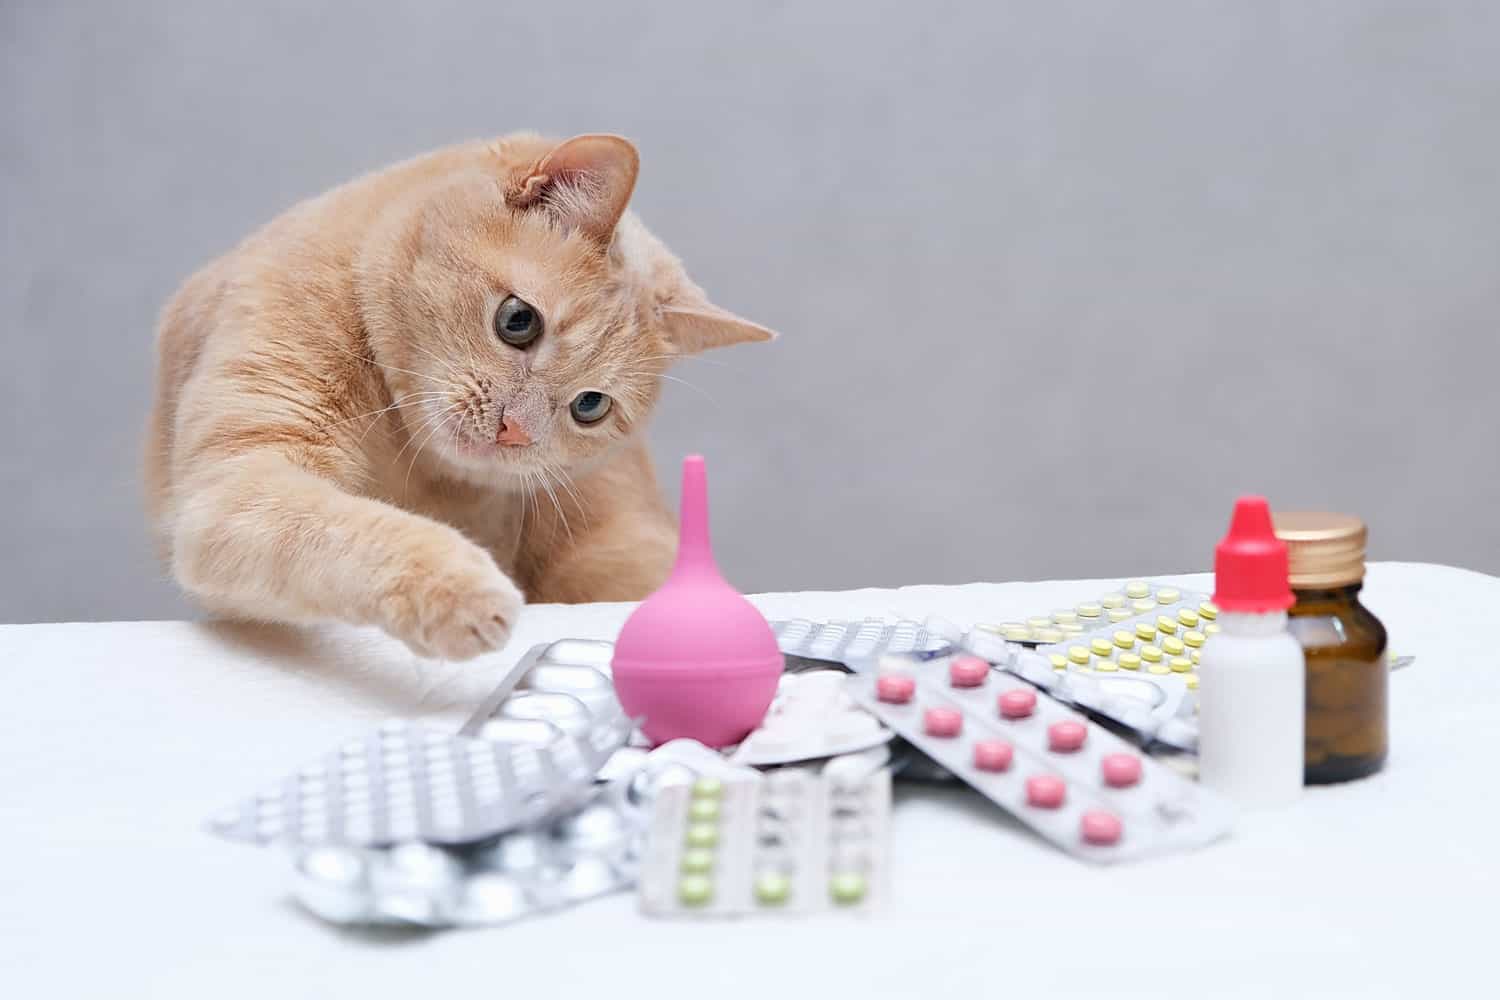 A red-haired cat sitting in front of a pile of medicines and playing with a rubber medical enema. Pet treatment concept.
